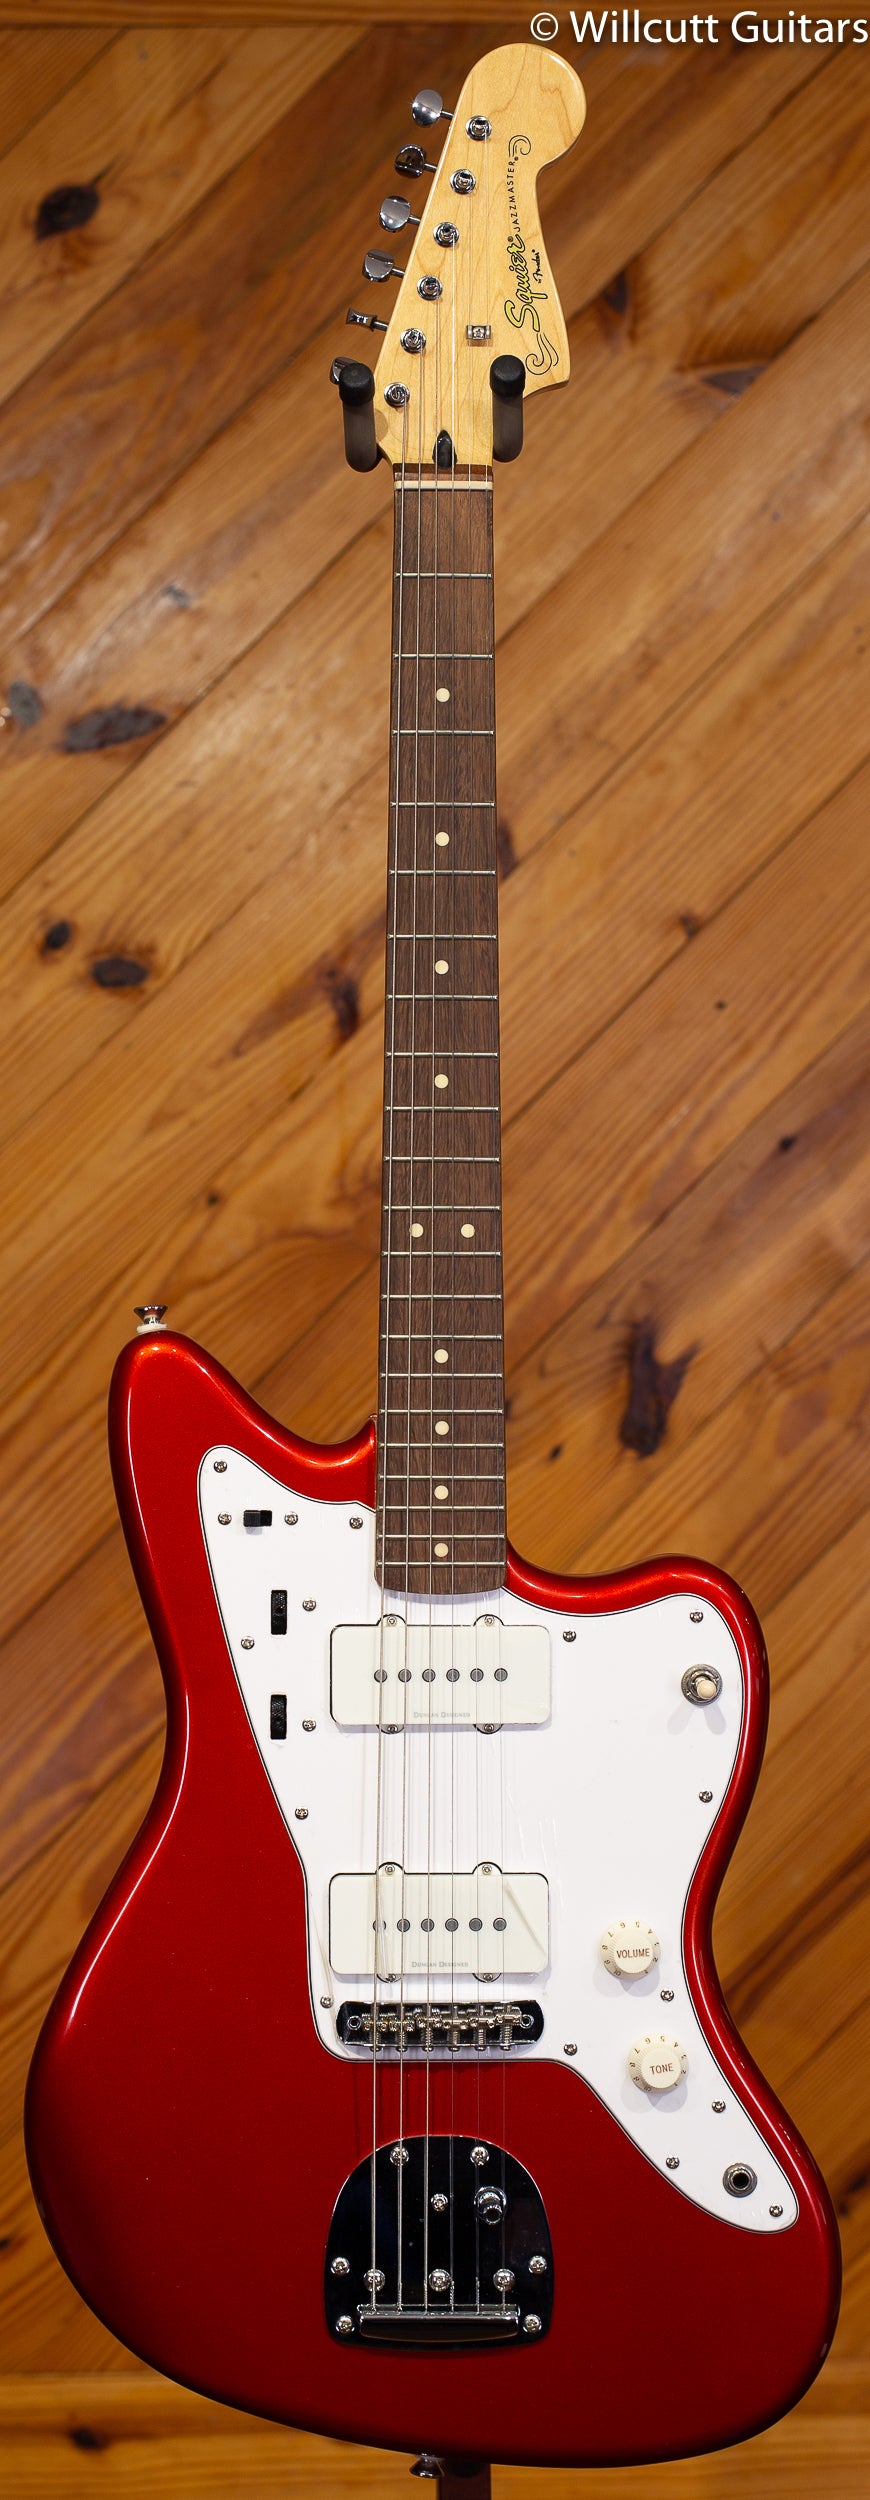 Squier Vintage Modified, Jazzmaster, Candy Apple Red - Willcutt